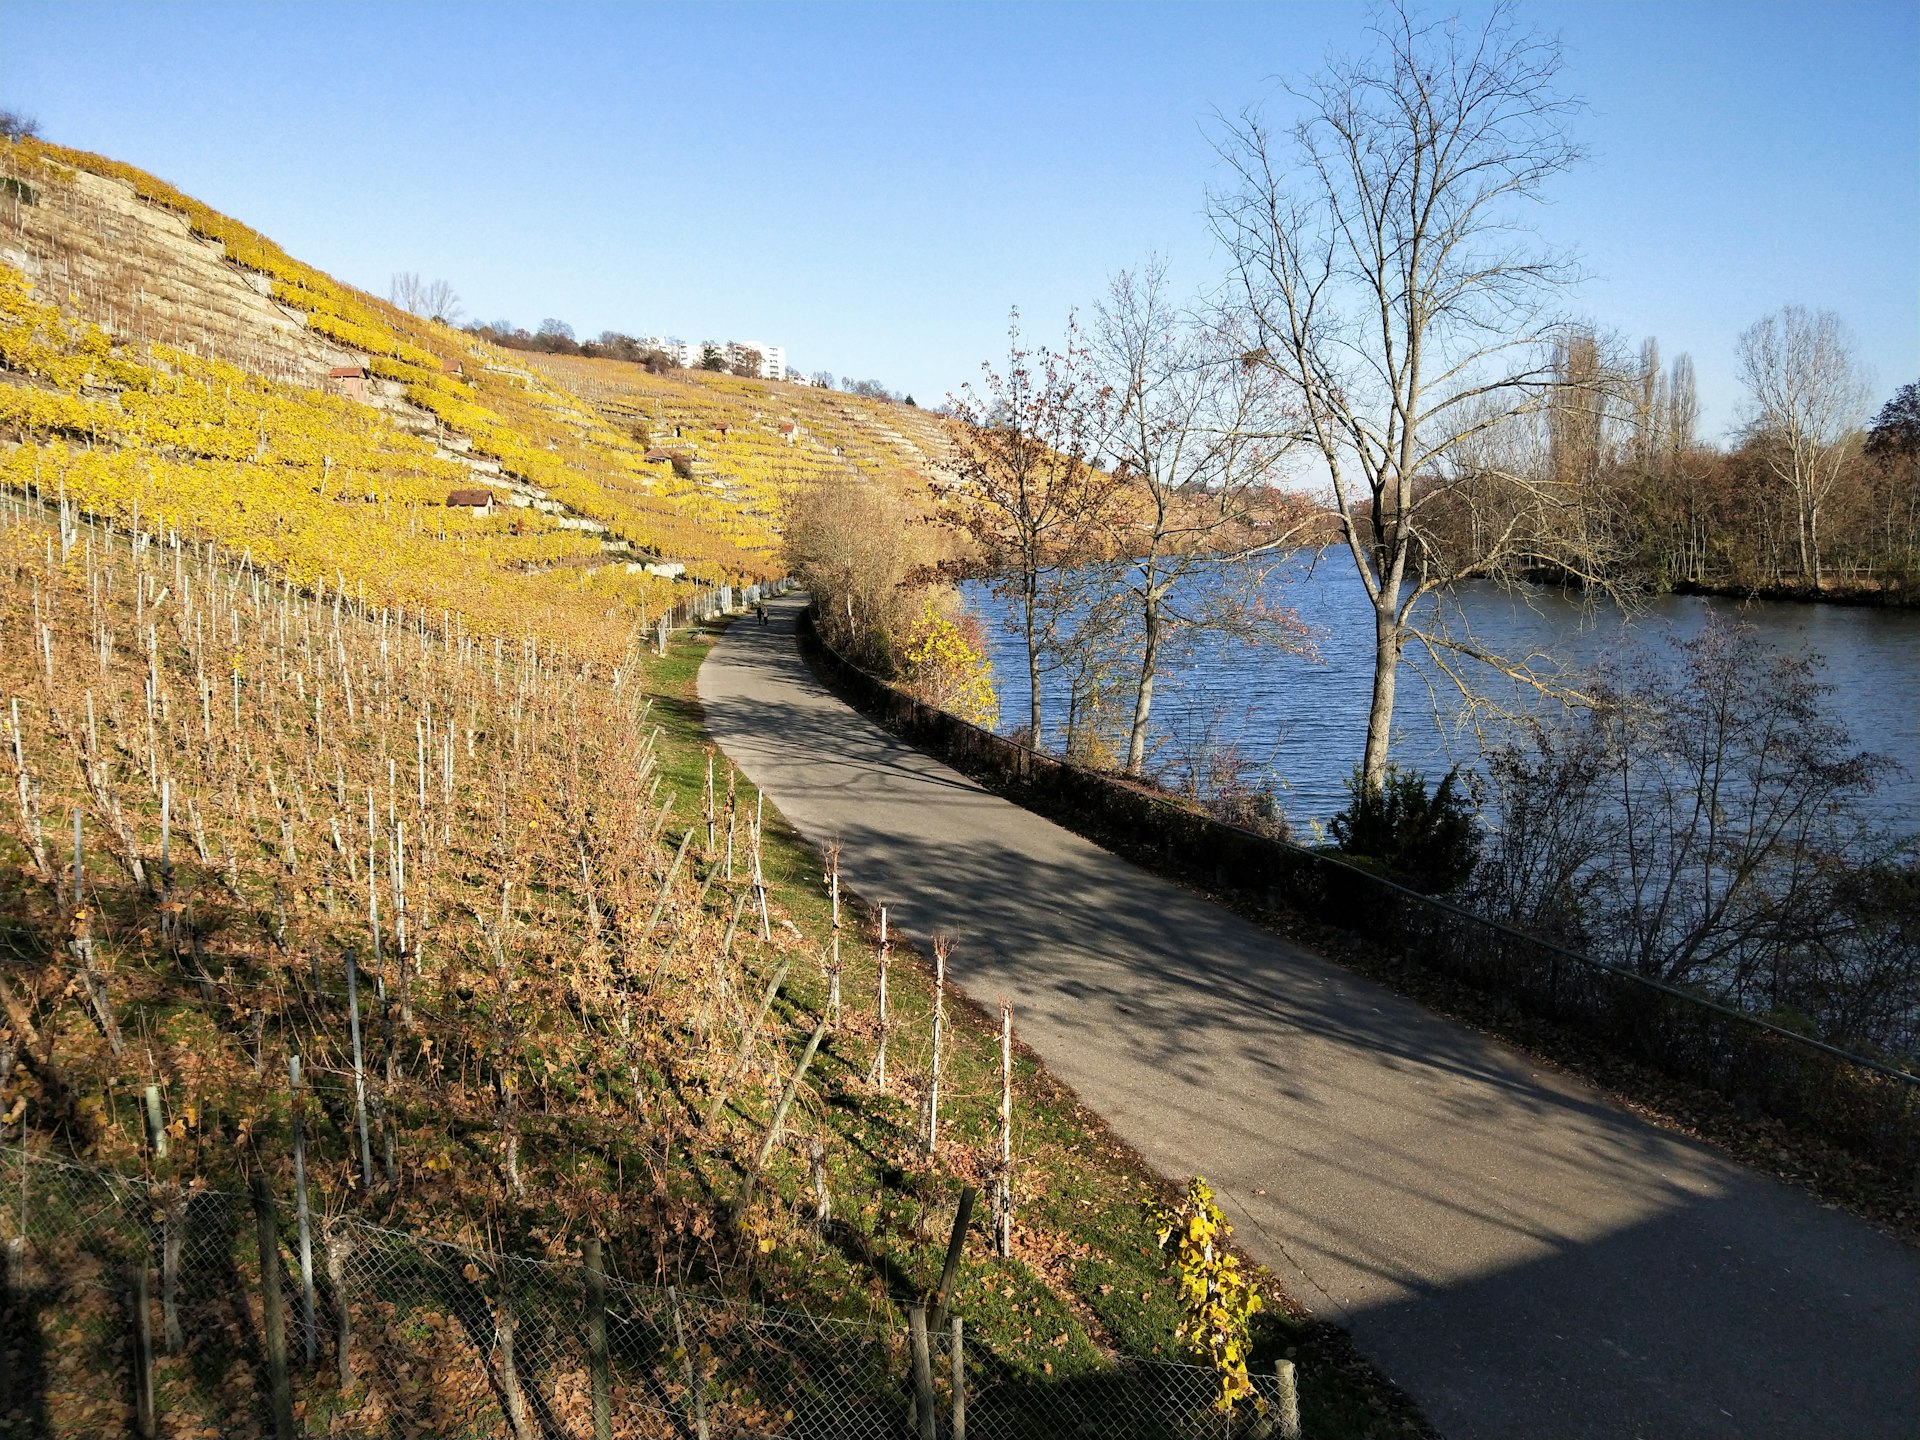 A well-kept path curves along a narrow part of a lake in autumn. To the left is a slope that has some bare vines, and others whose leaves have turned yellow.